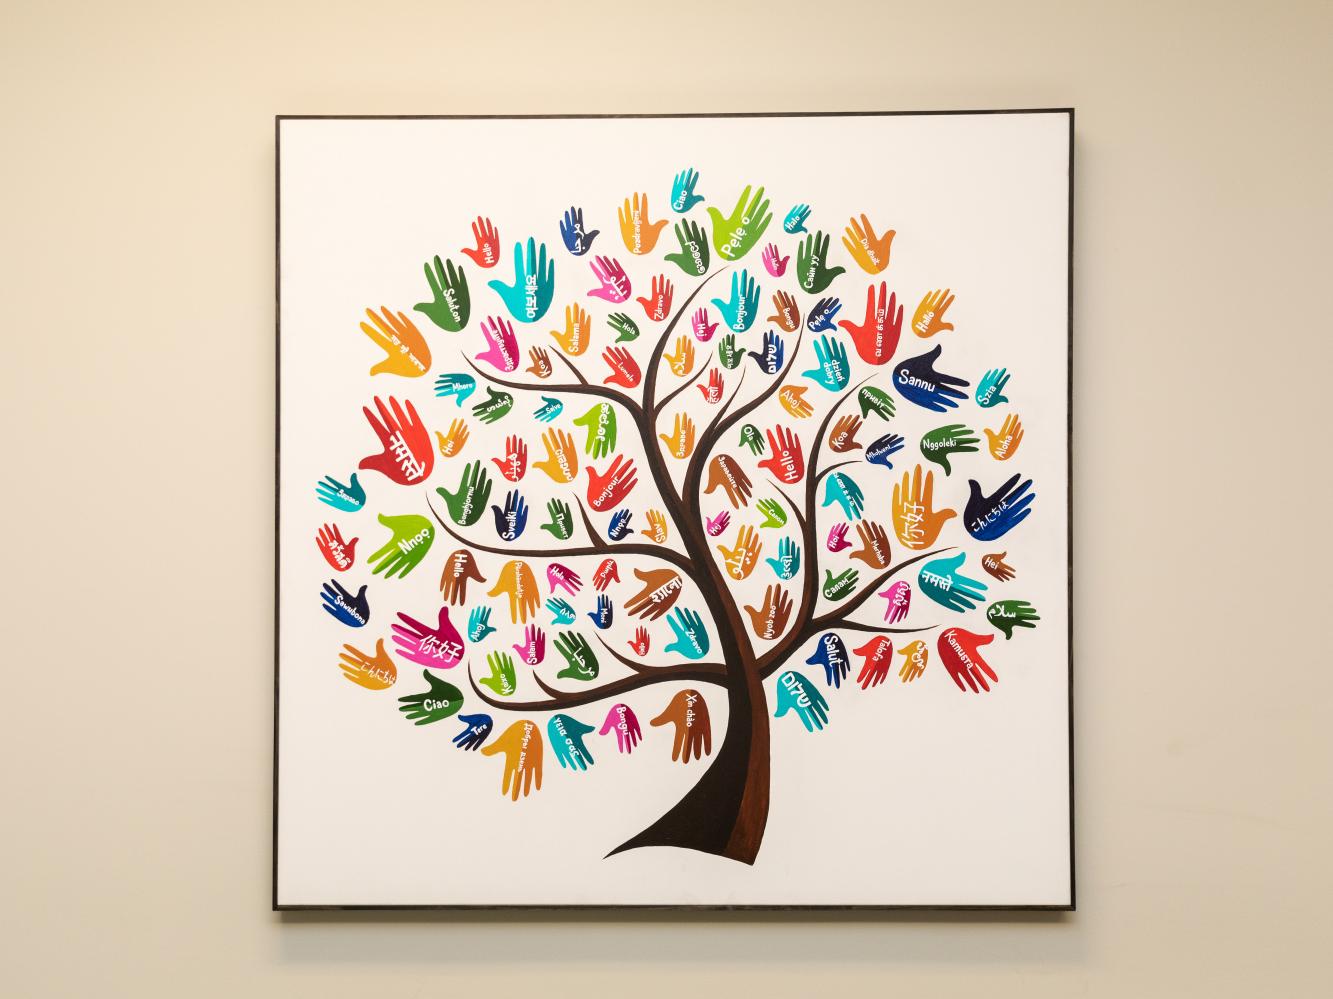 pic of painting of tree with leaves having the word "hello" in various languages